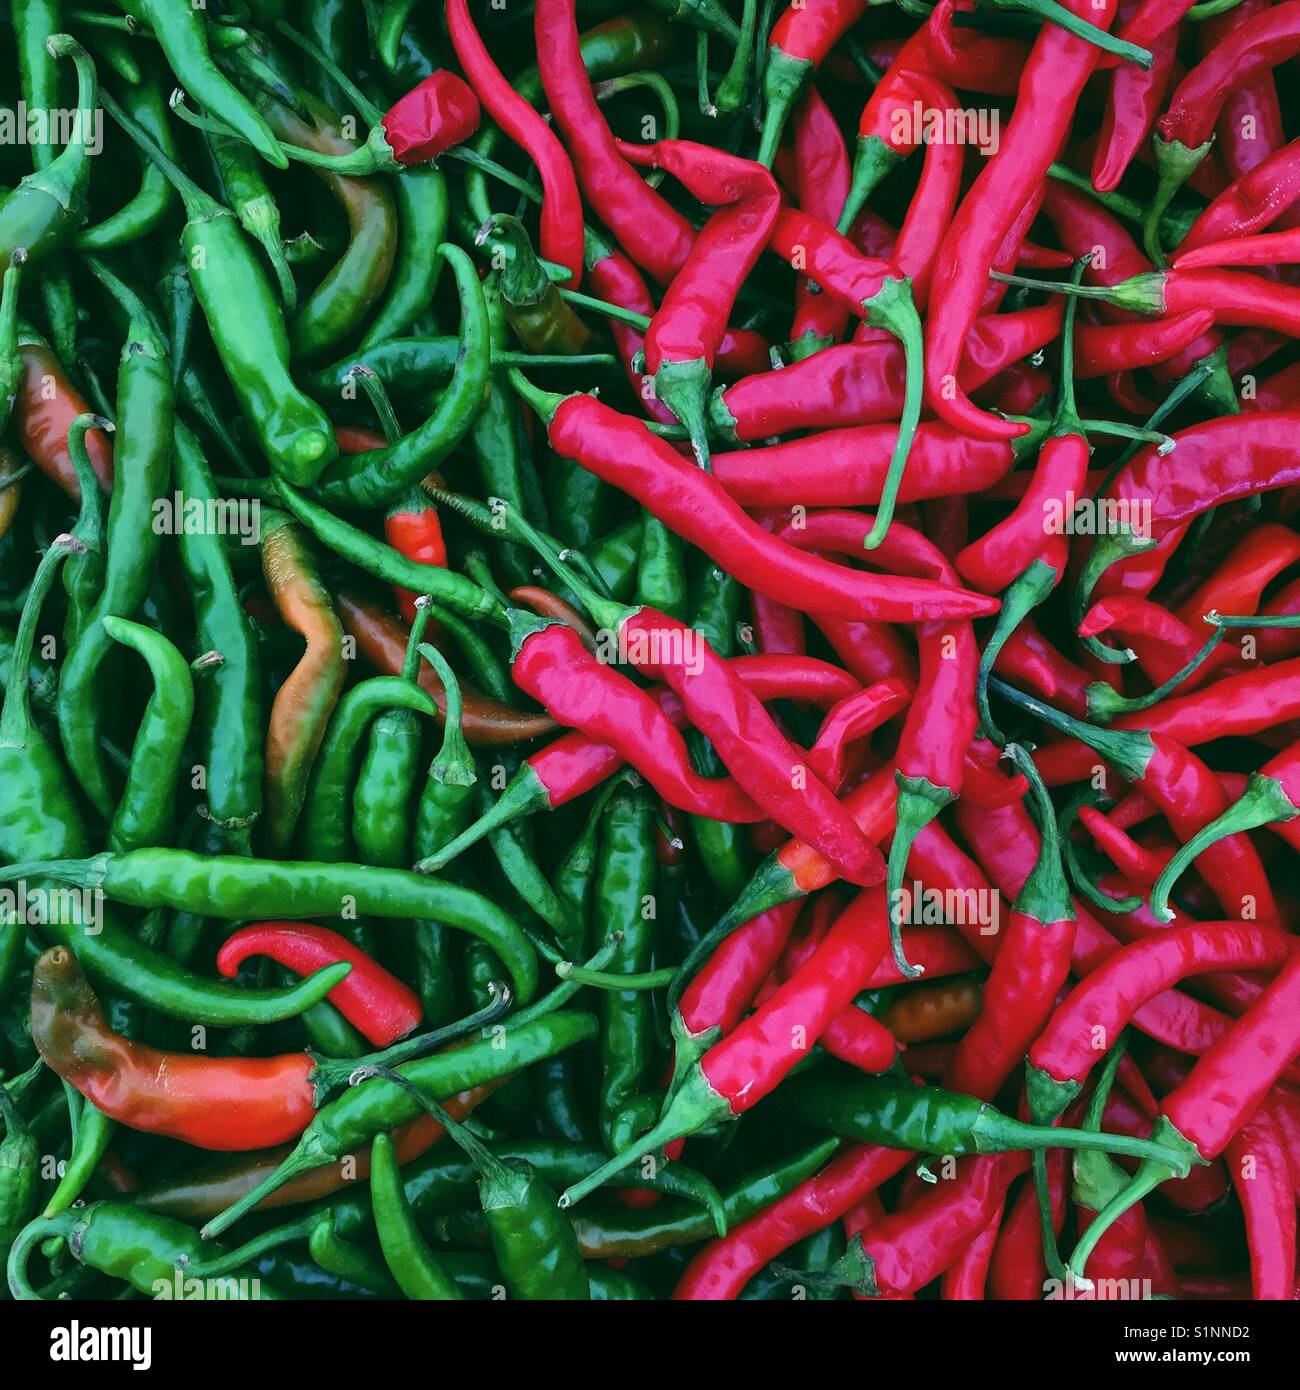 Red and green chillies at a market Stock Photo